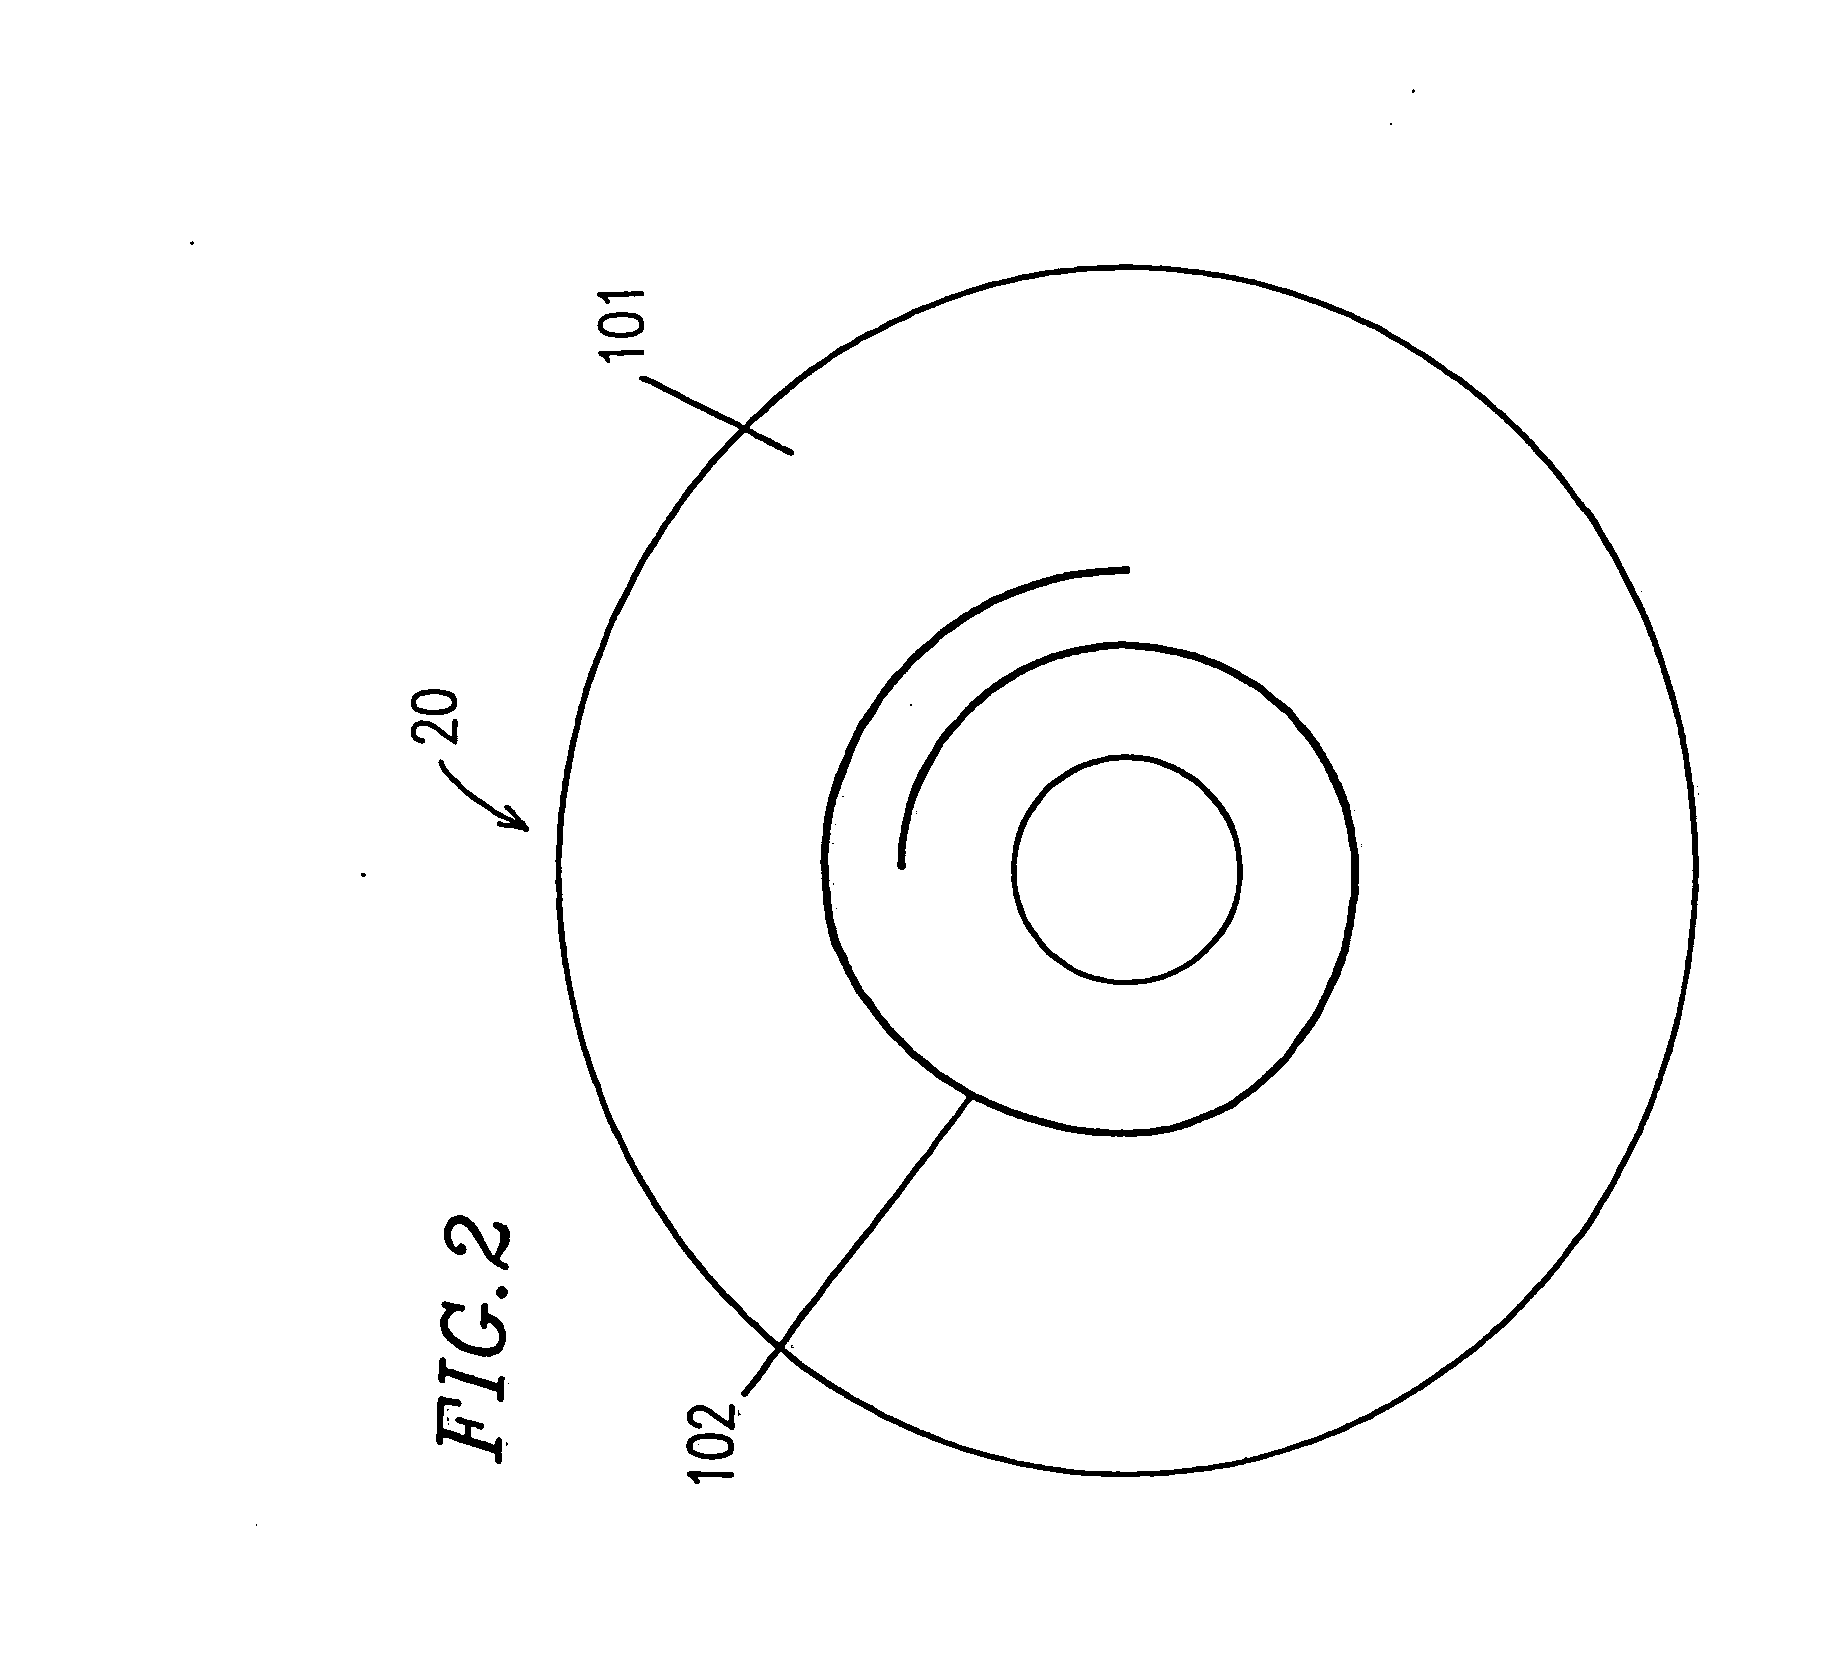 Optical disc and physical address format